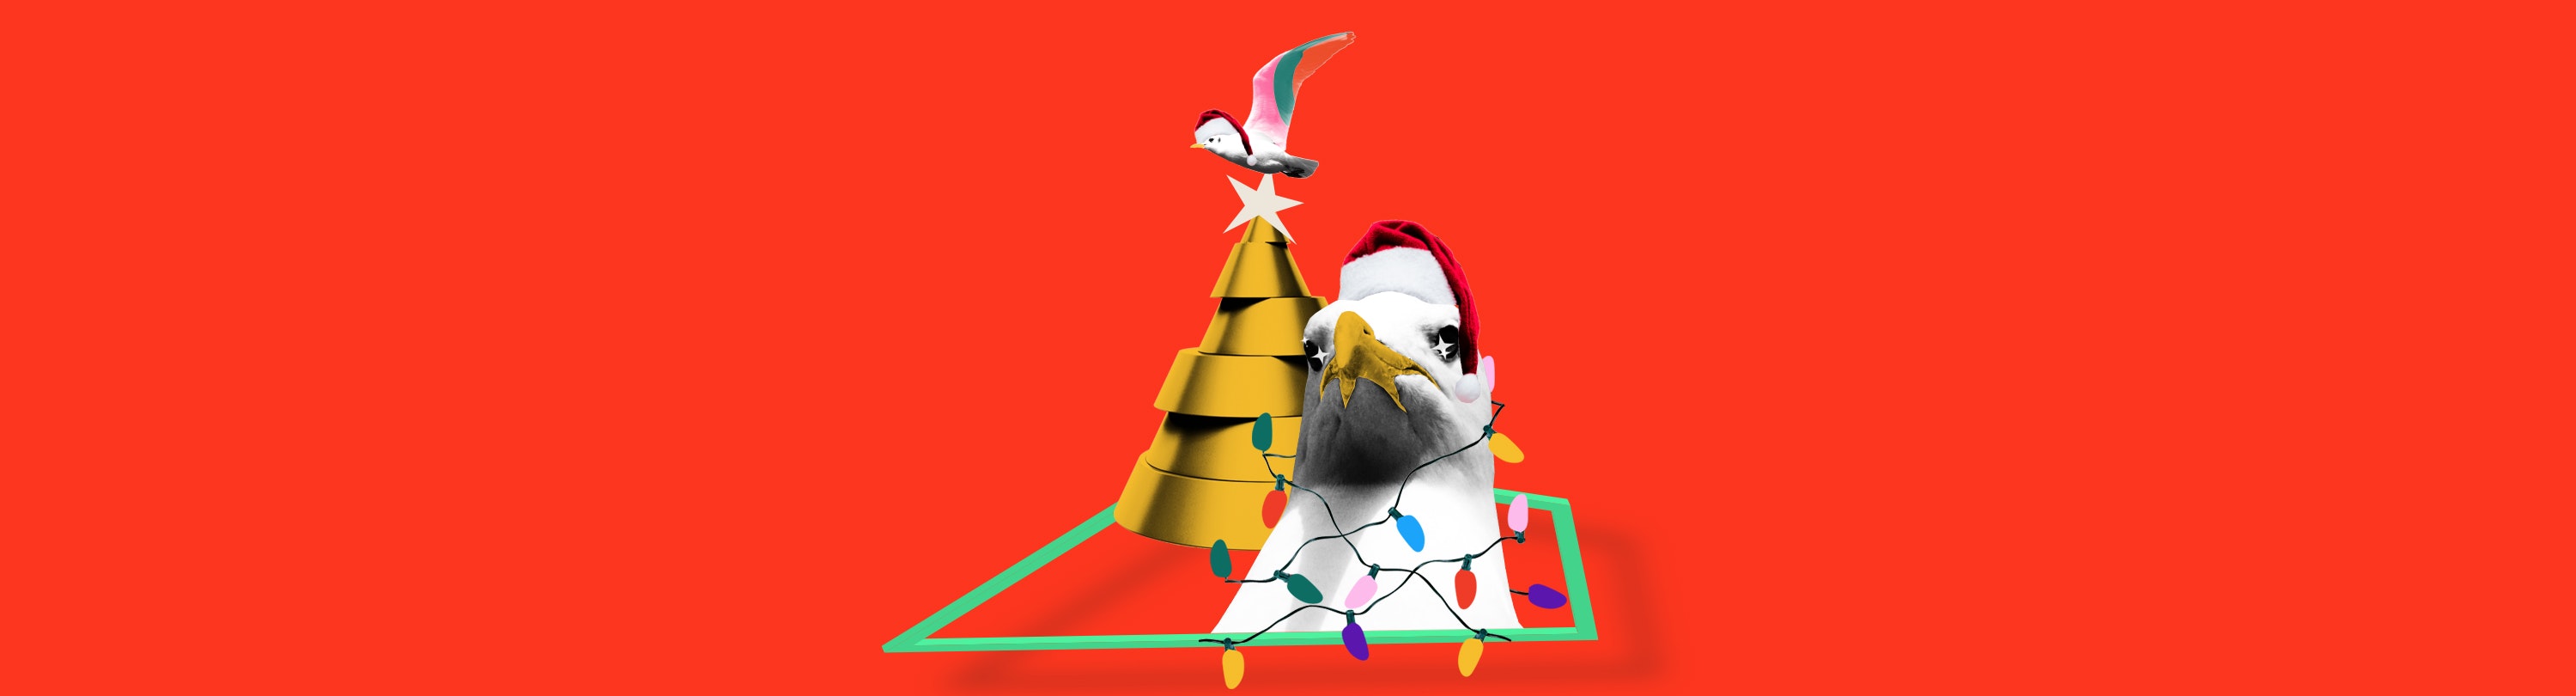 An illustration of a gold pyramid type tree with a seagull at the top and then in the foreground the bust of a larger seagull wearing a Santa hap wrapped in lights